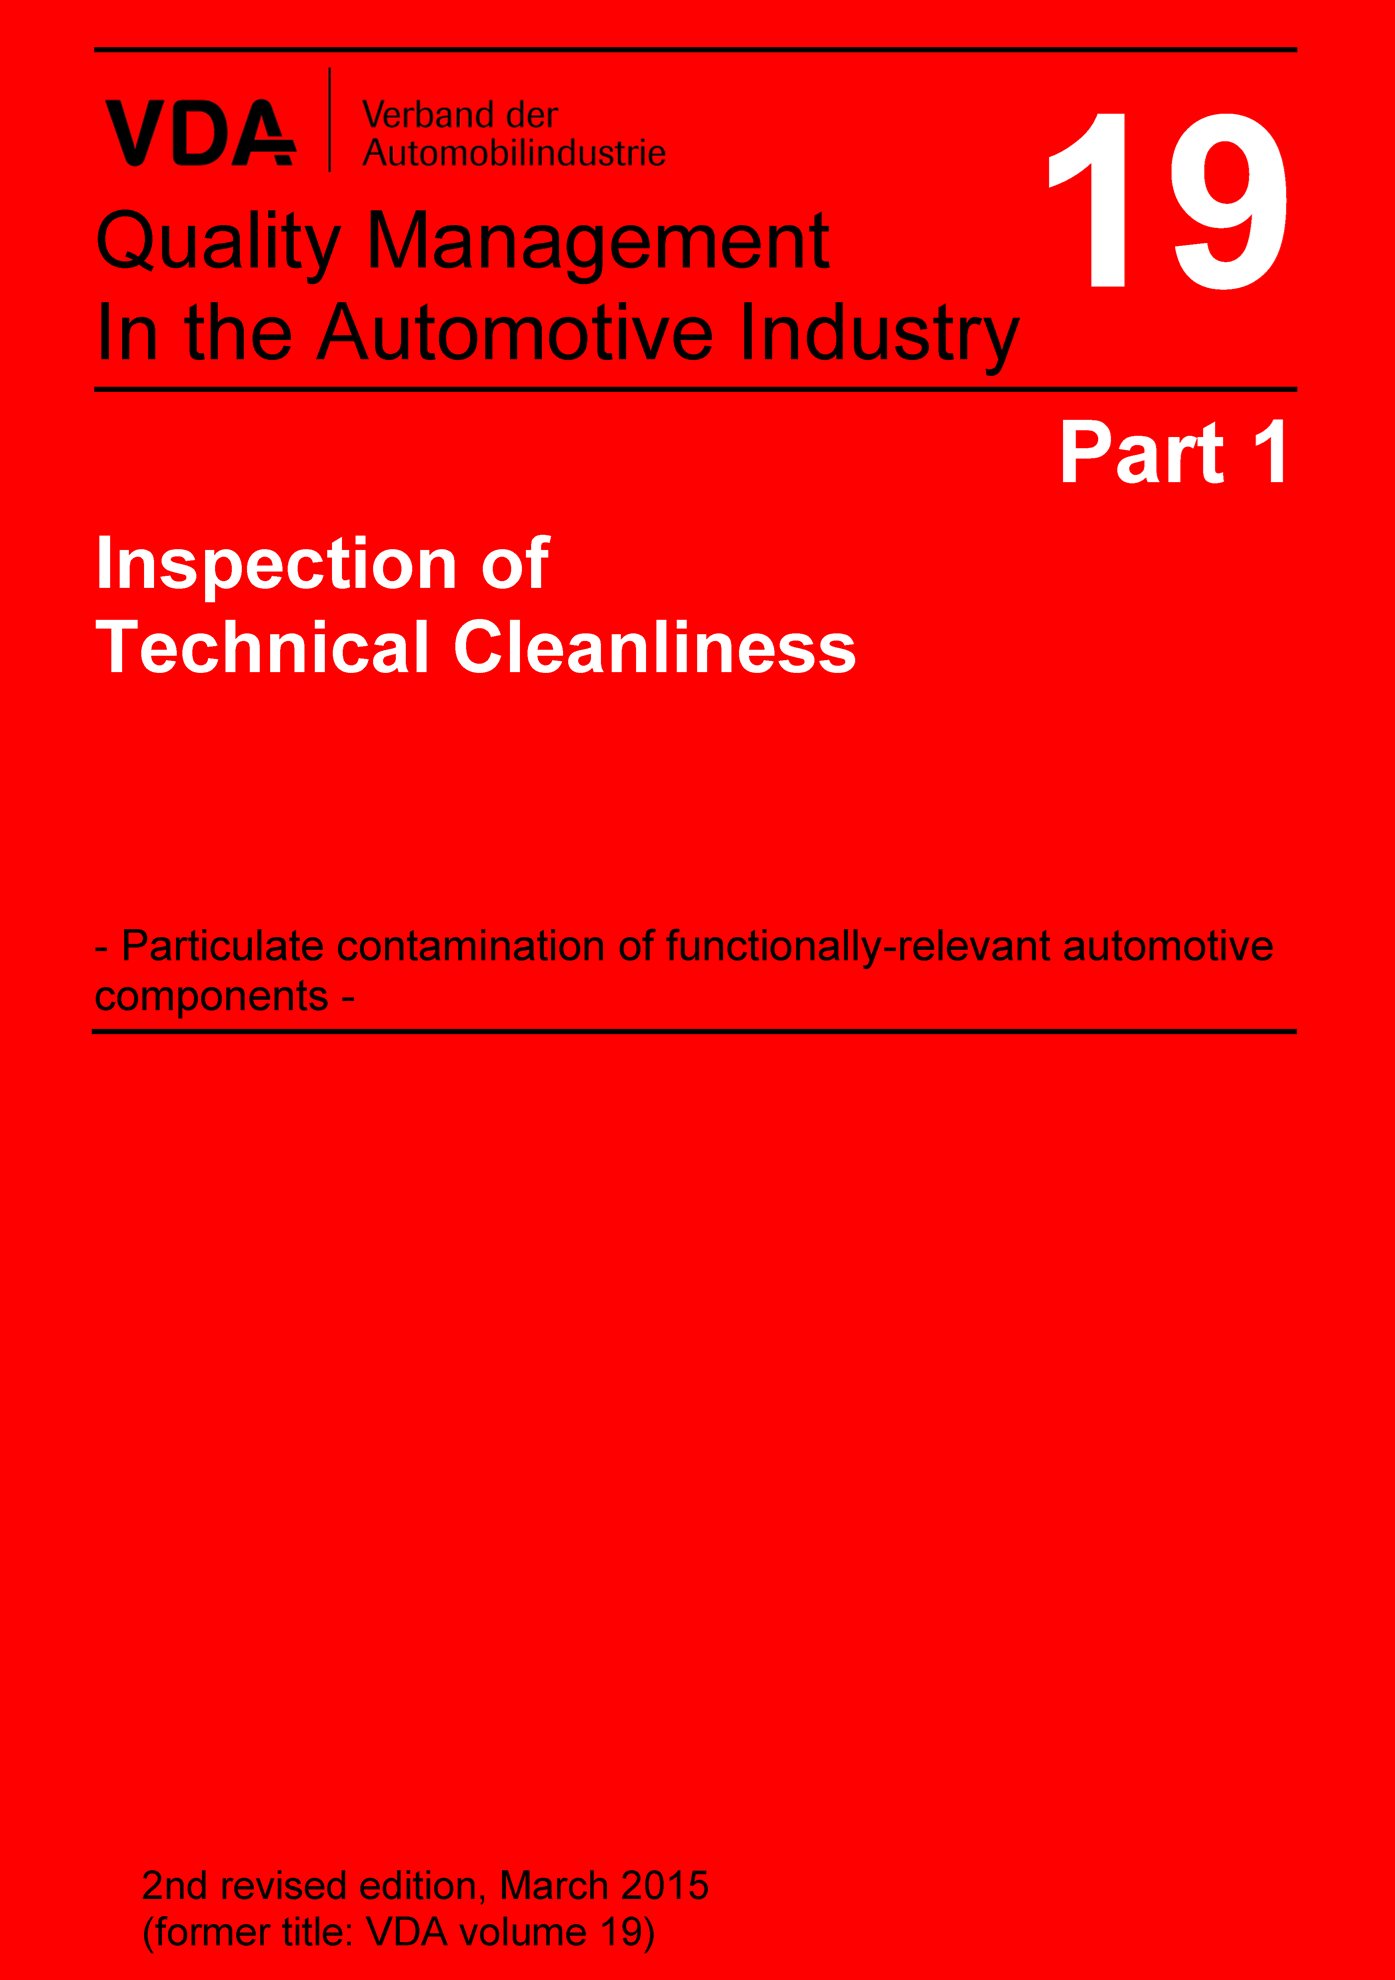 Náhľad  VDA Volume 19 Part 1, Inspection of Technical Cleanliness >Particulate Contamination of Functionally Relevant Automotive Components / 2nd Revised Edition, March 2015 (former title: VDA volume 19) 1.3.2015